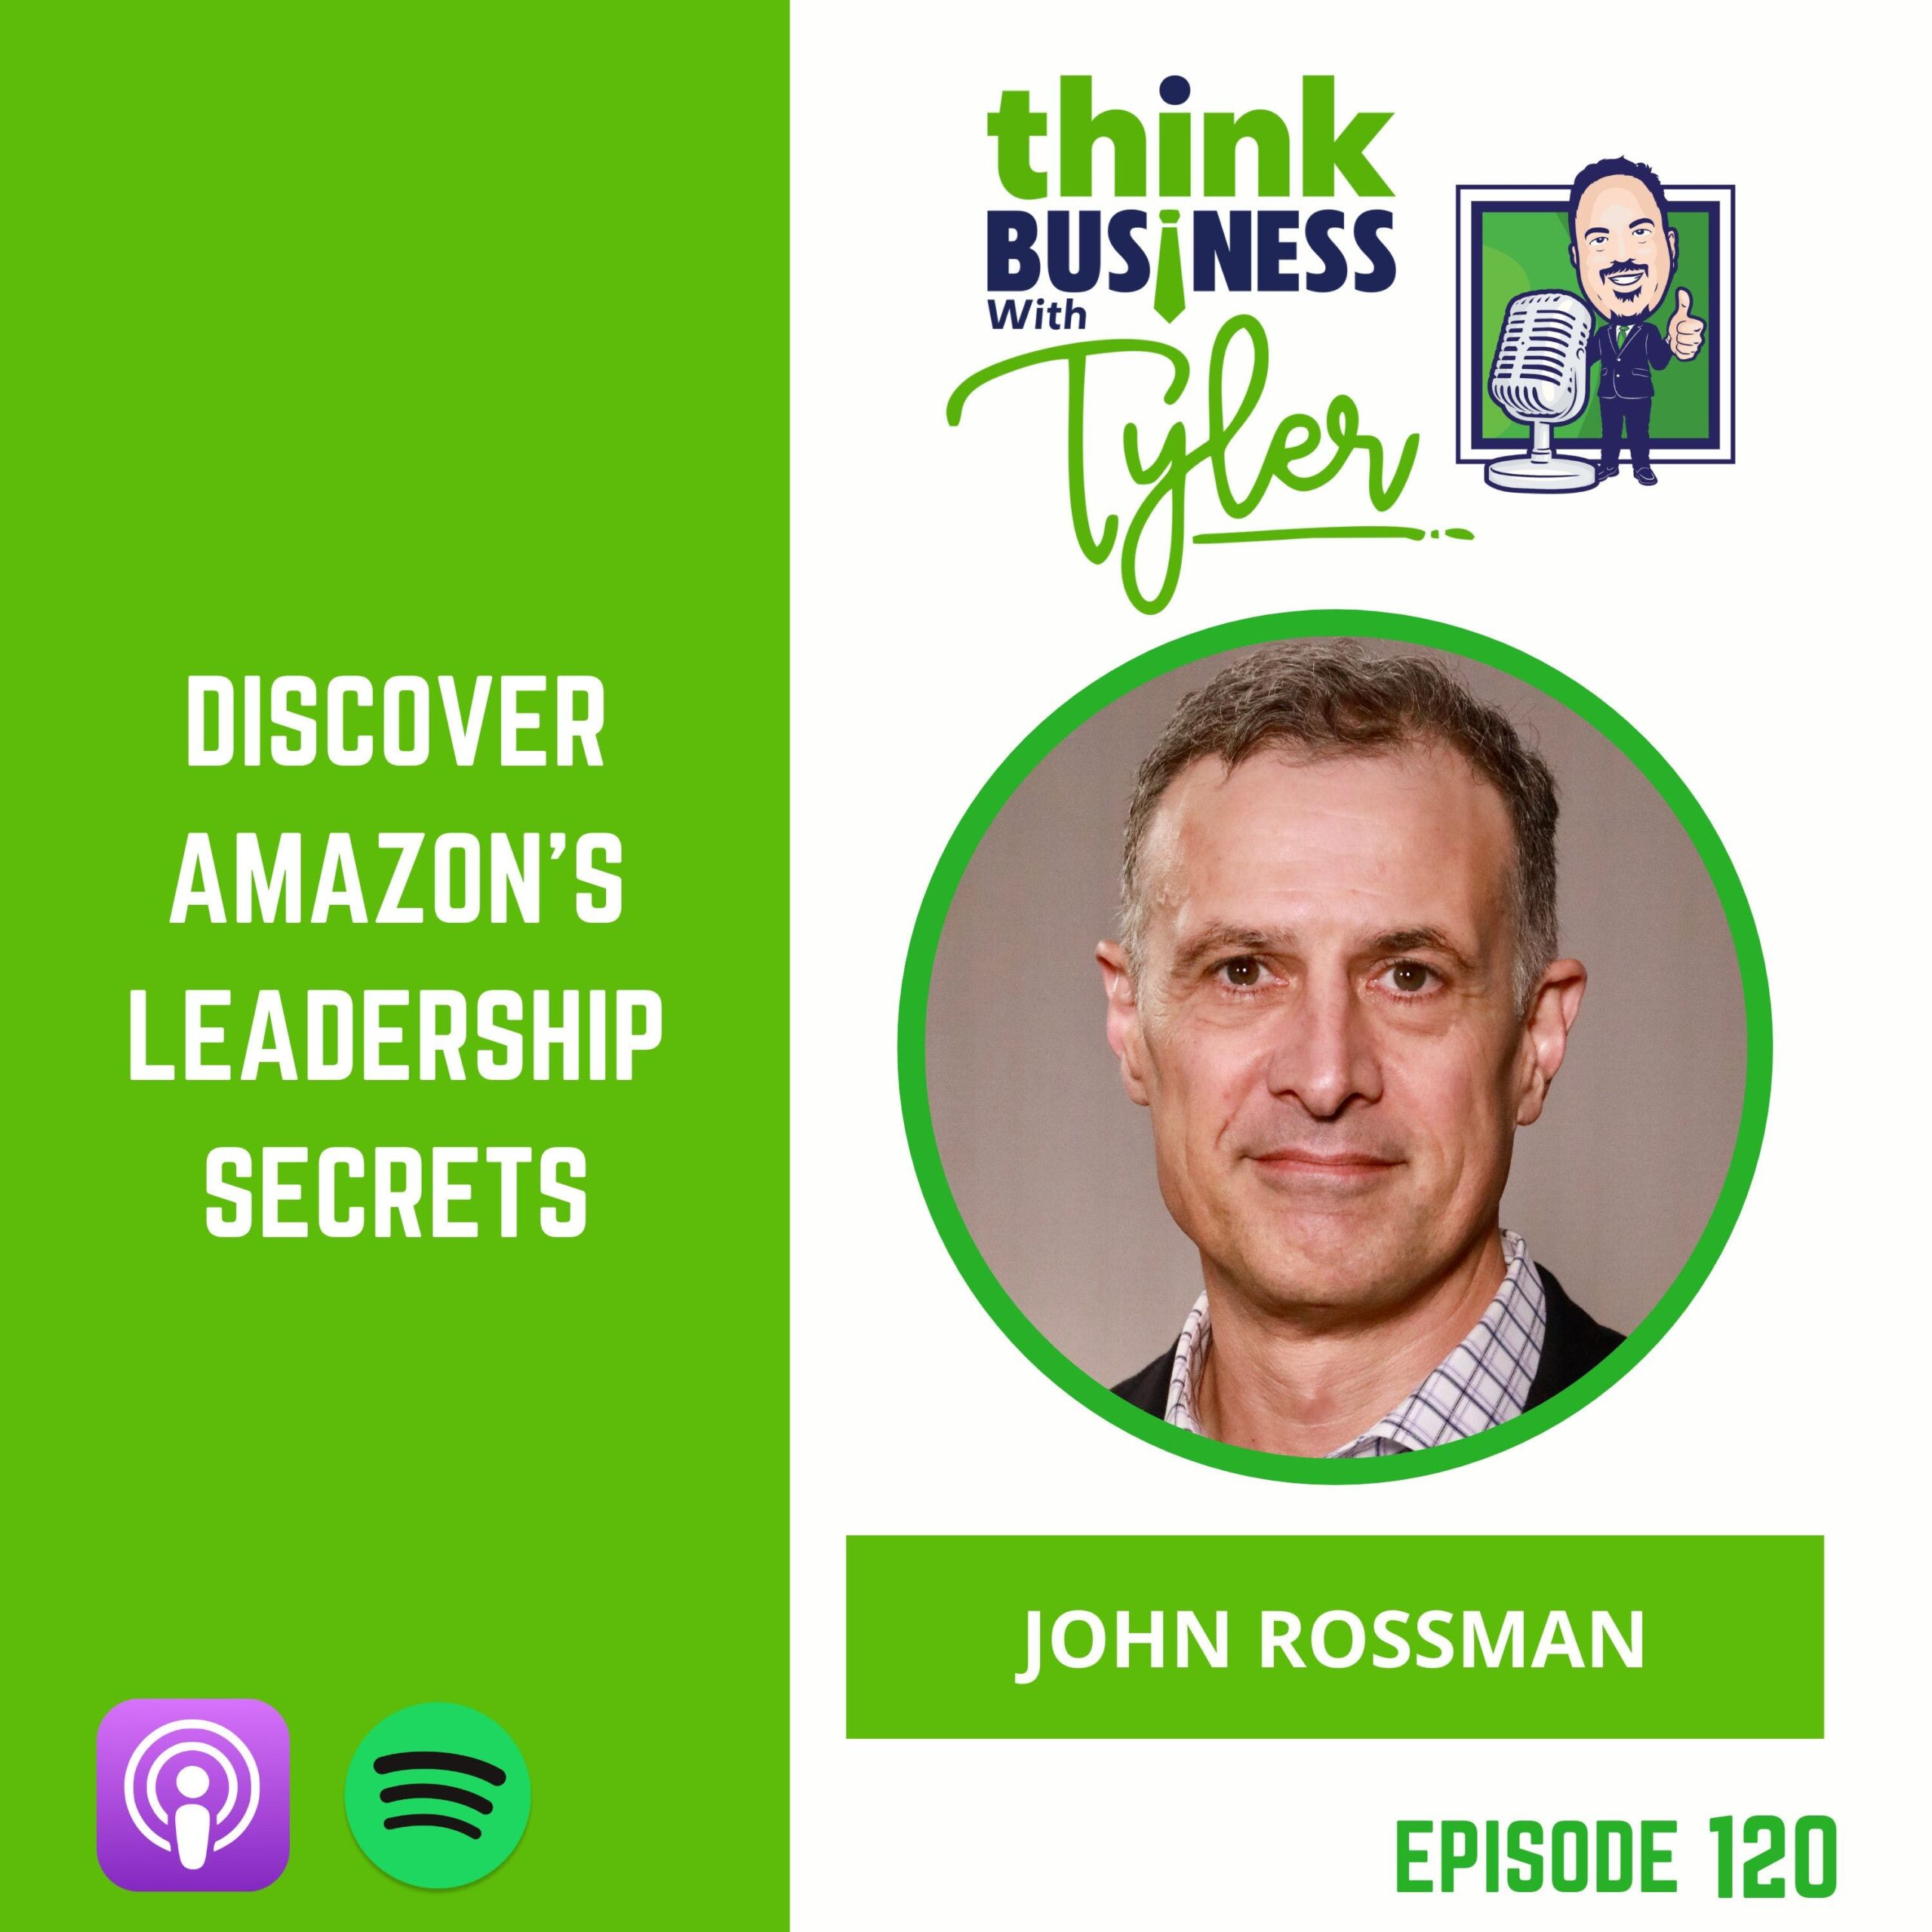 Think Business with Tyler — Rossman Conversation on Leadership